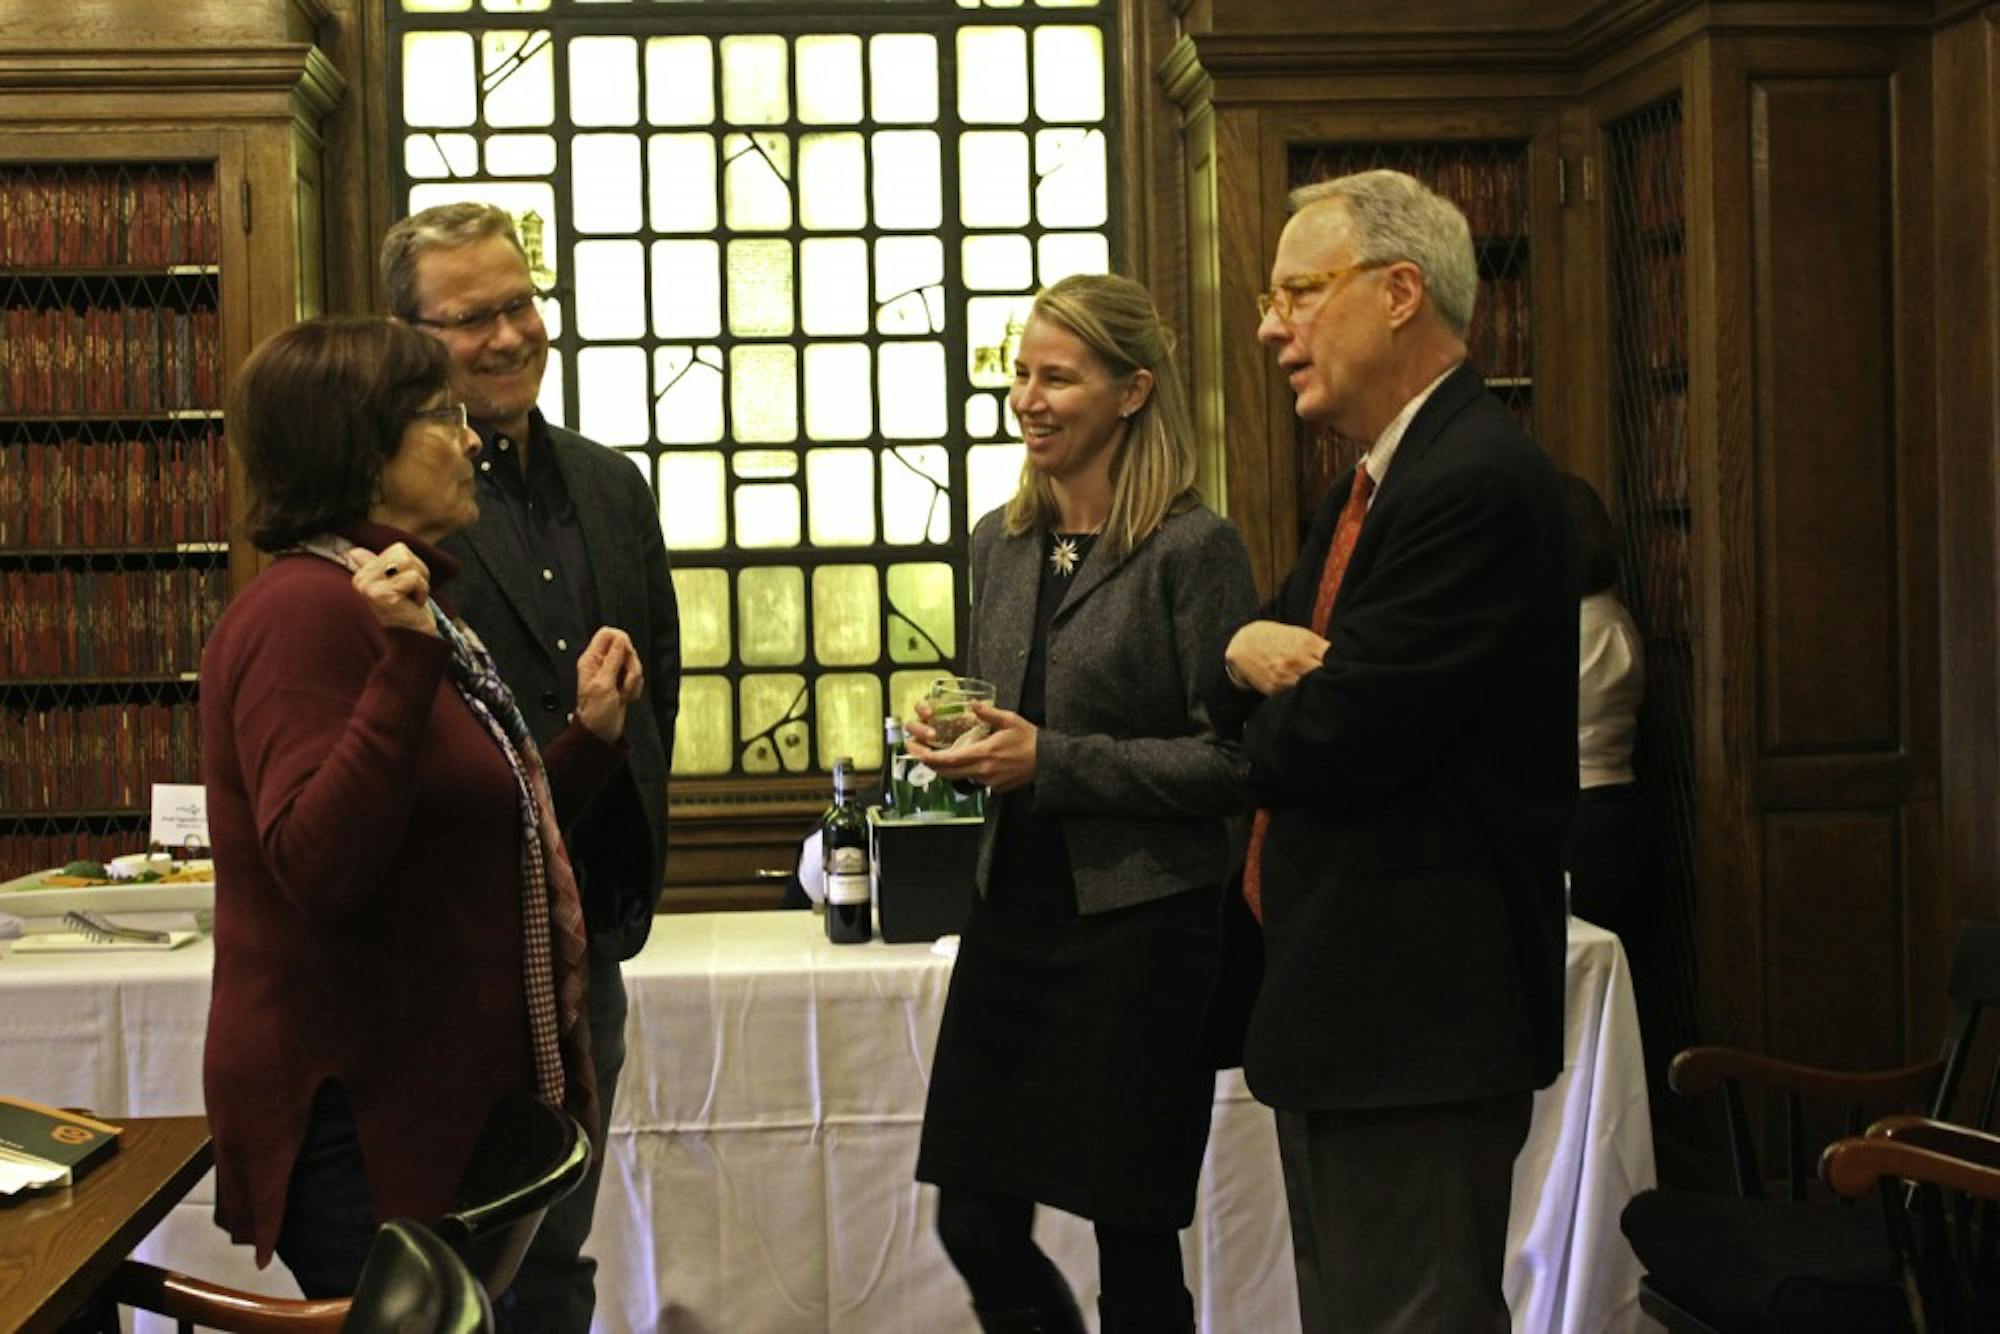 Professors Joy Kenseth and Jim Dorsey, alongside vice provost for academic initiatives Denise Anthony and dean of libraries Jeff Horrell, spoke about open access for faculty work at Monday’s event.